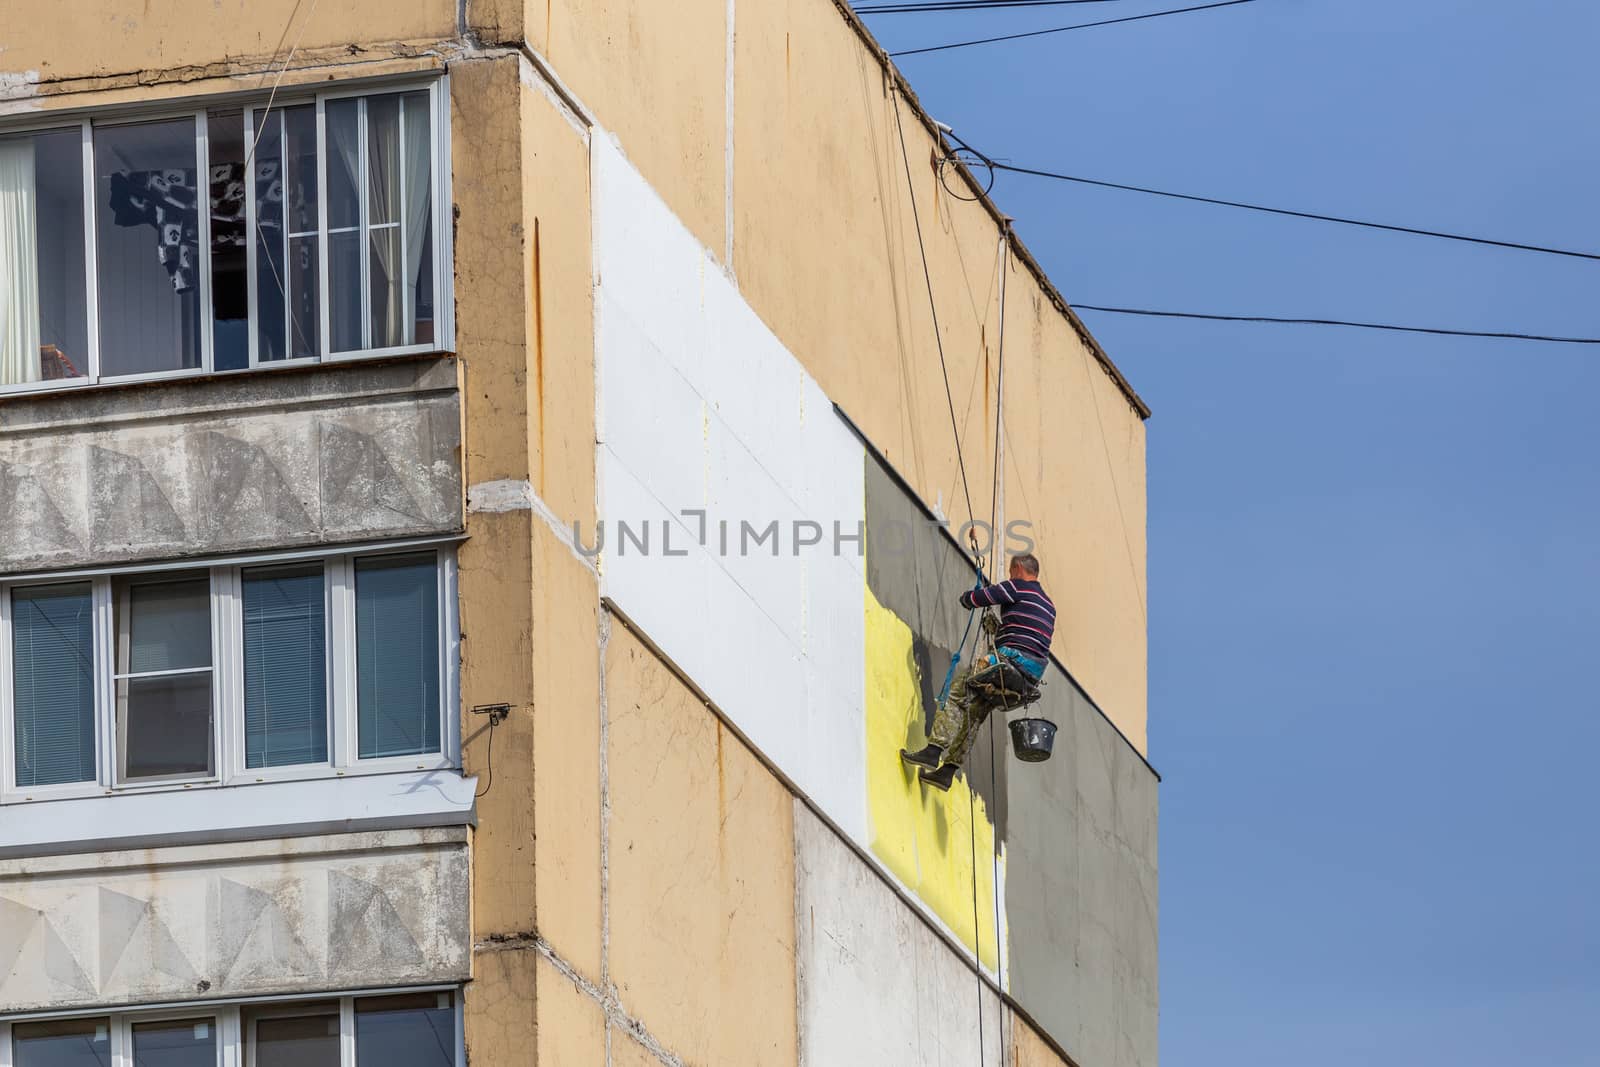 TULA, RUSSIA - OCTOBER 10, 2020: Industrial climber worker applying additional styrofoam insulation on outside wall of nine-storey apartment building at autumn morning daylight. Photo from ground level.